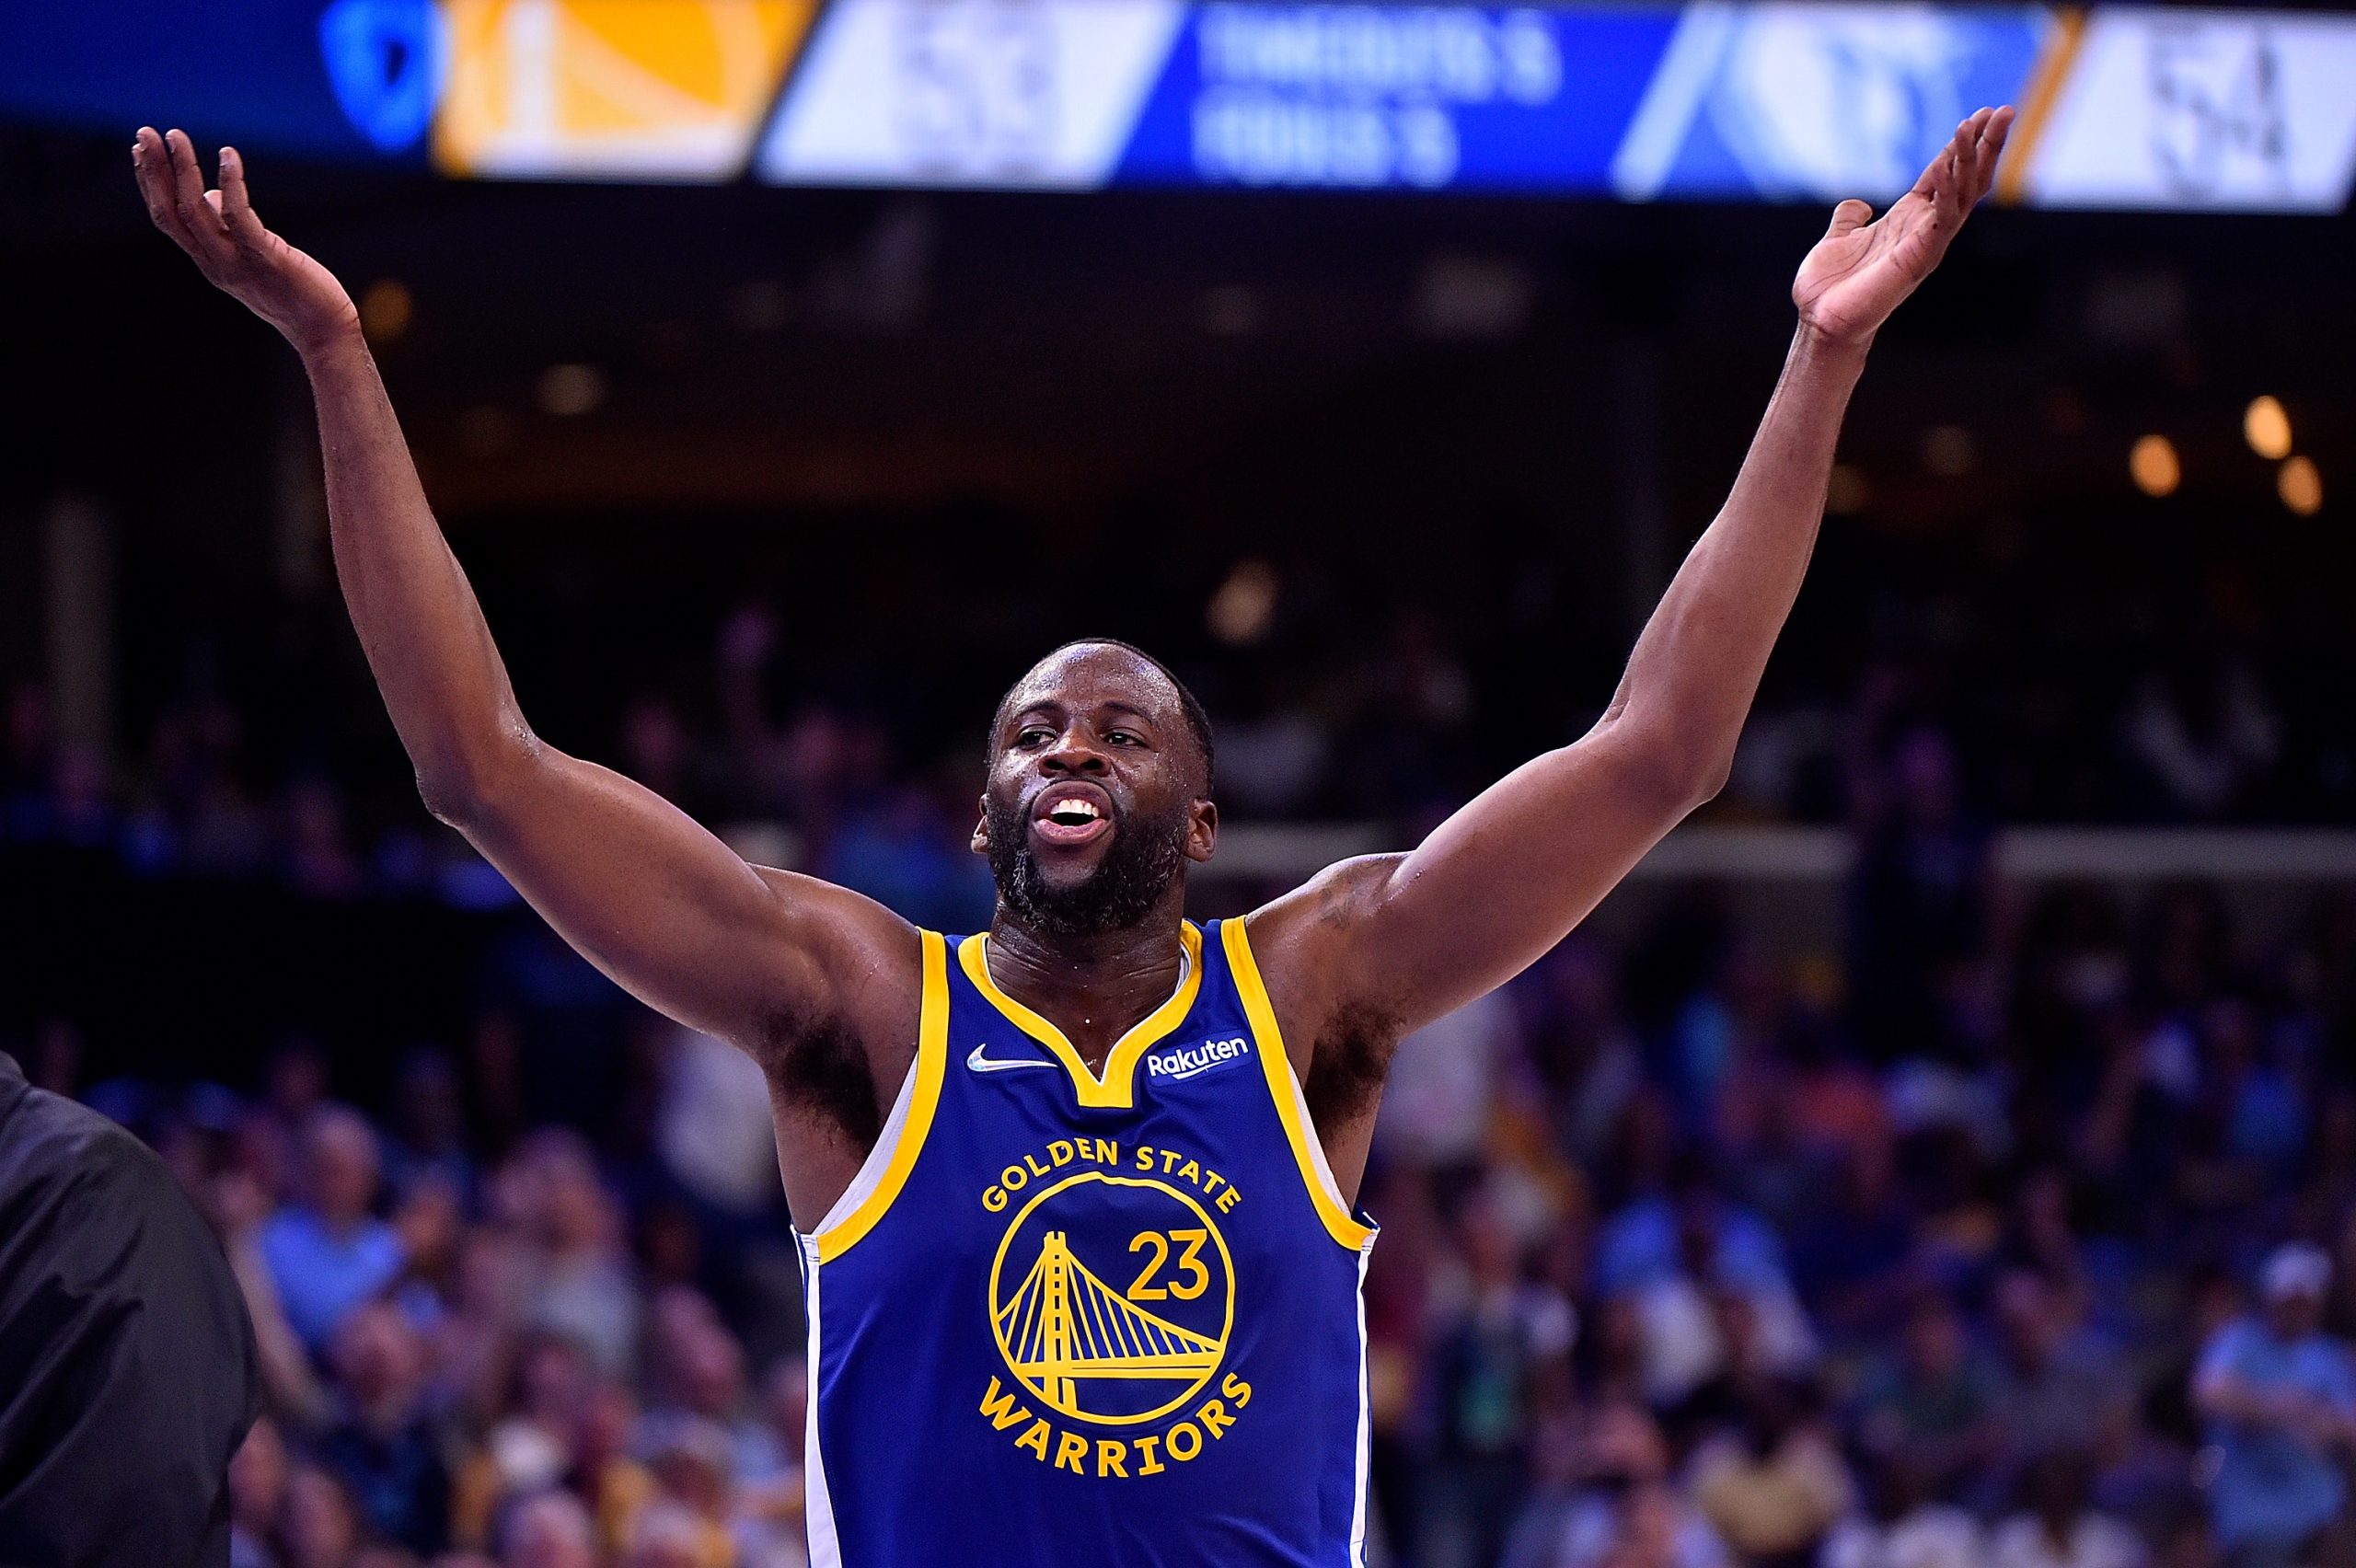 Draymond Green’s Flagrant 2 Foul Will Not Be Reduced